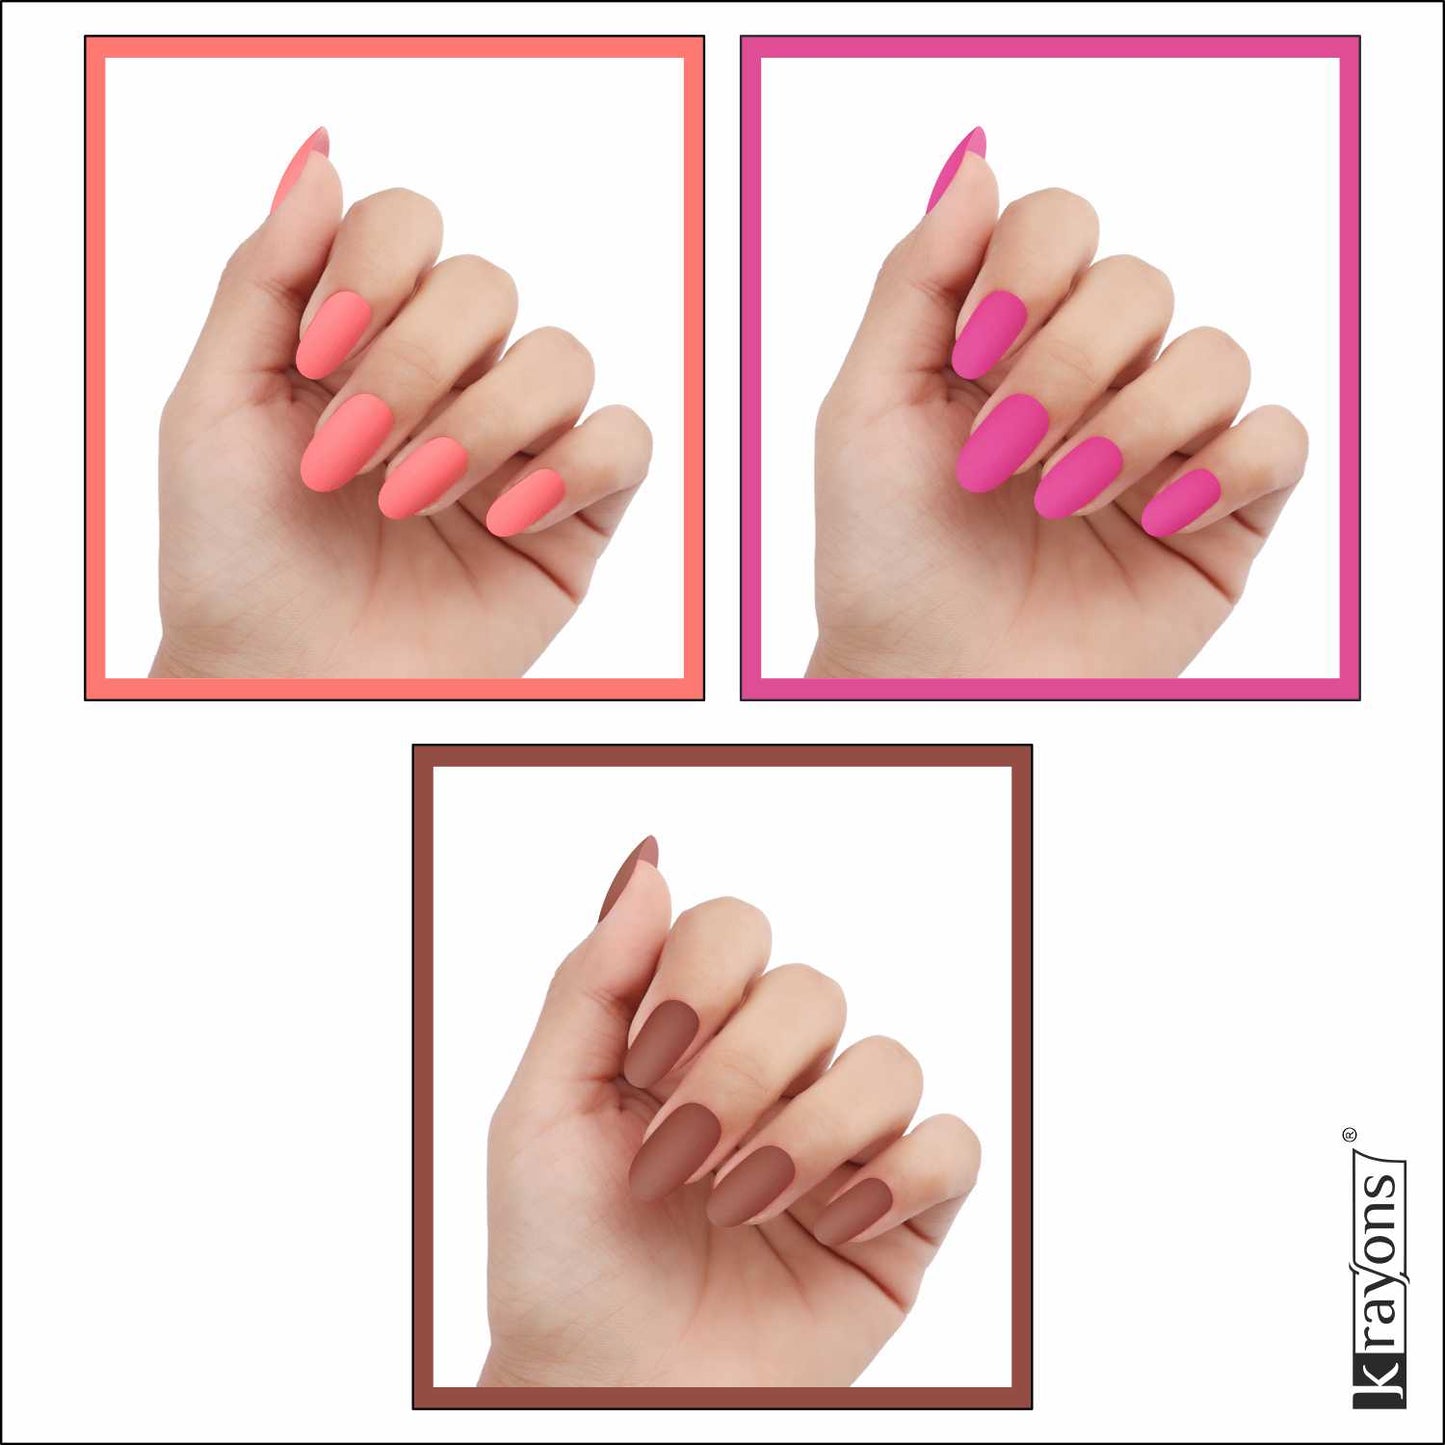 Krayons Cute Super Matte Finish Nail Enamel, Quick Dry, LongLasting, Blossom Peach, Hot Pink, Chestnut Matte, 6ml Each (Pack of 3)